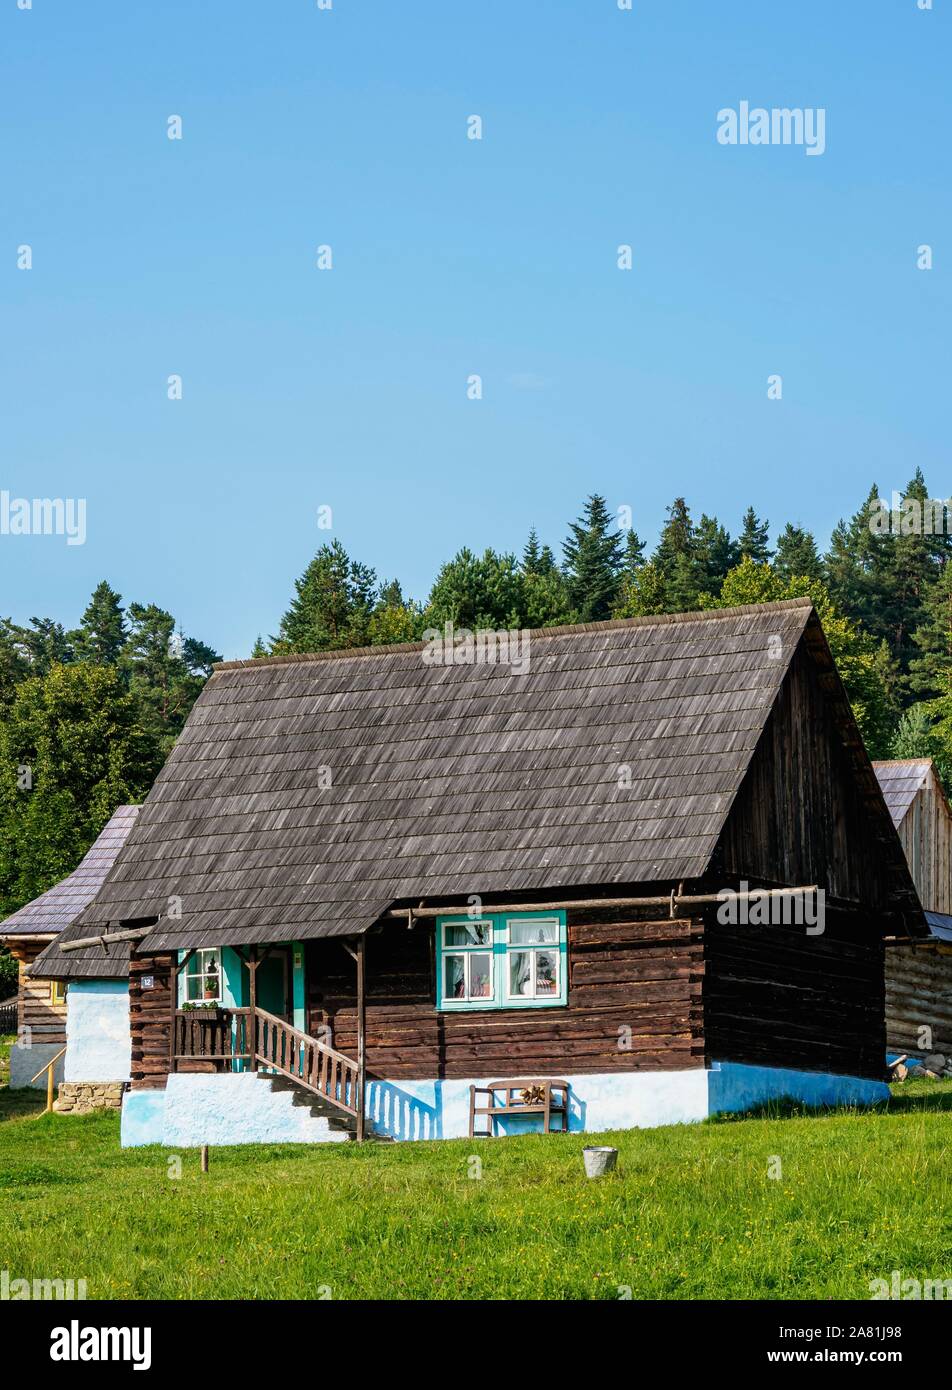 Stara Hut High Resolution Stock Photography and Images - Alamy